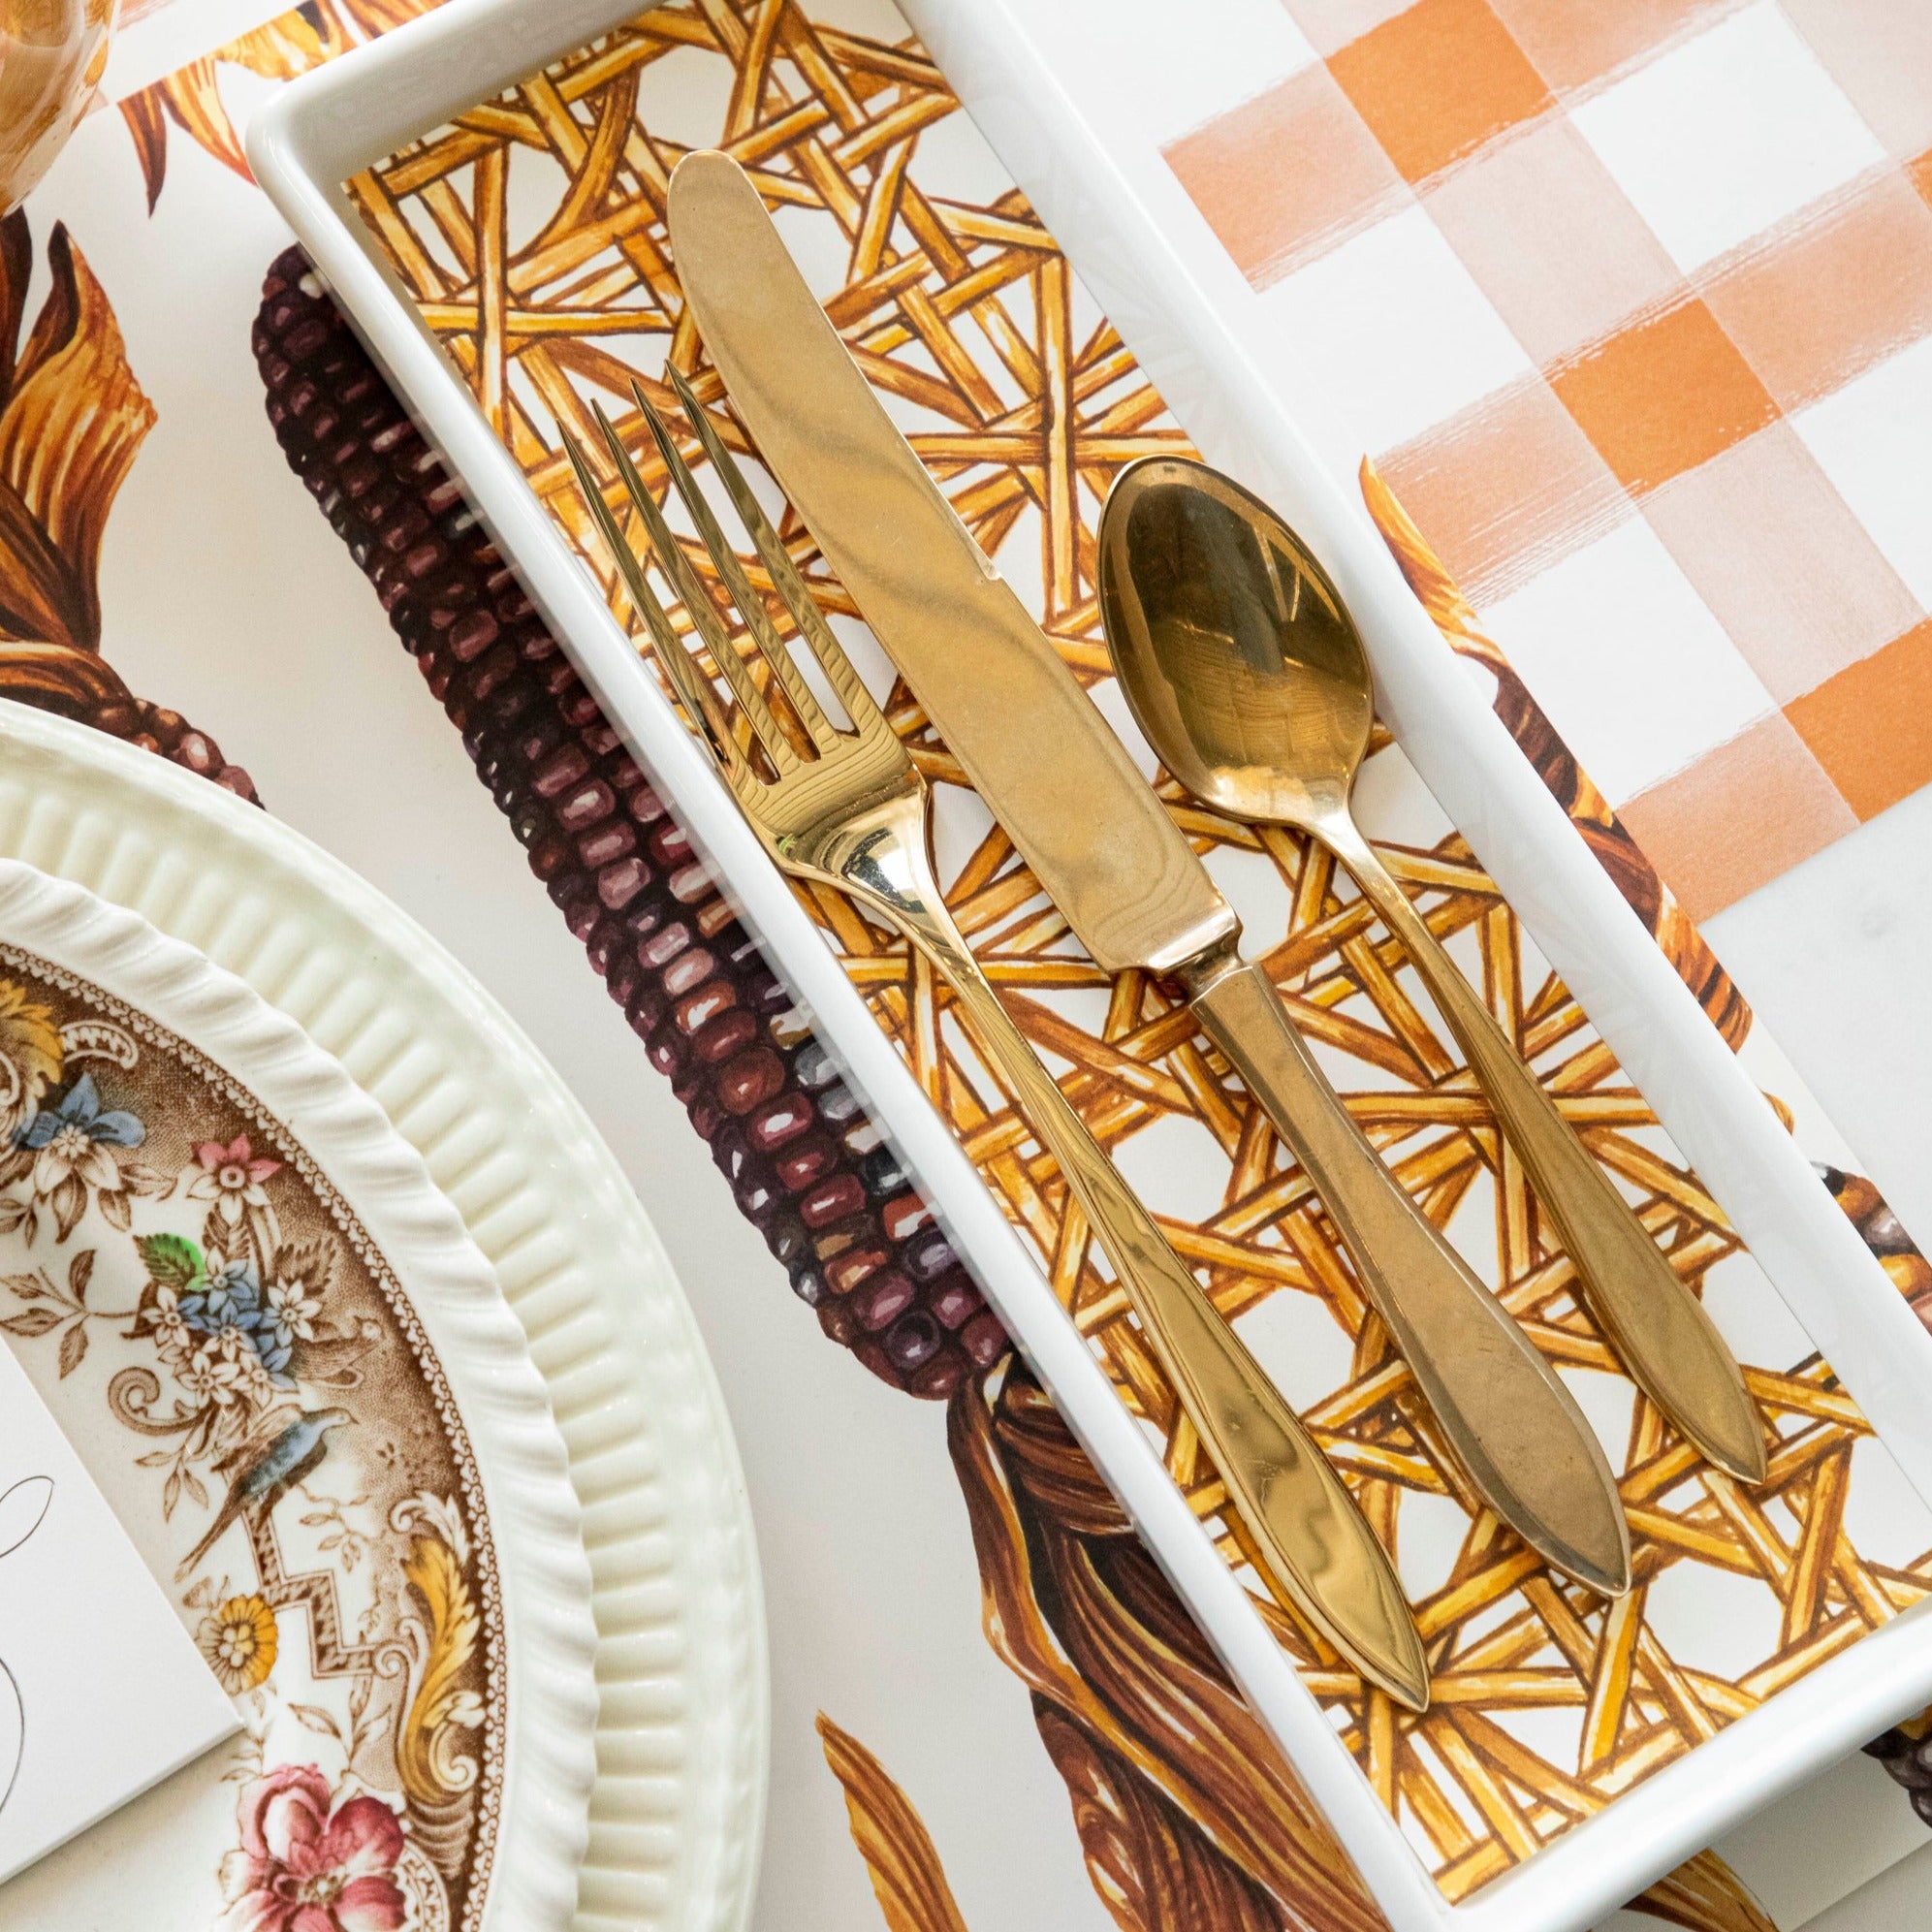 Close-up of a flatware tray lined with a rectangle cut from a Rattan Weave Placemat, used in an elegant place setting.